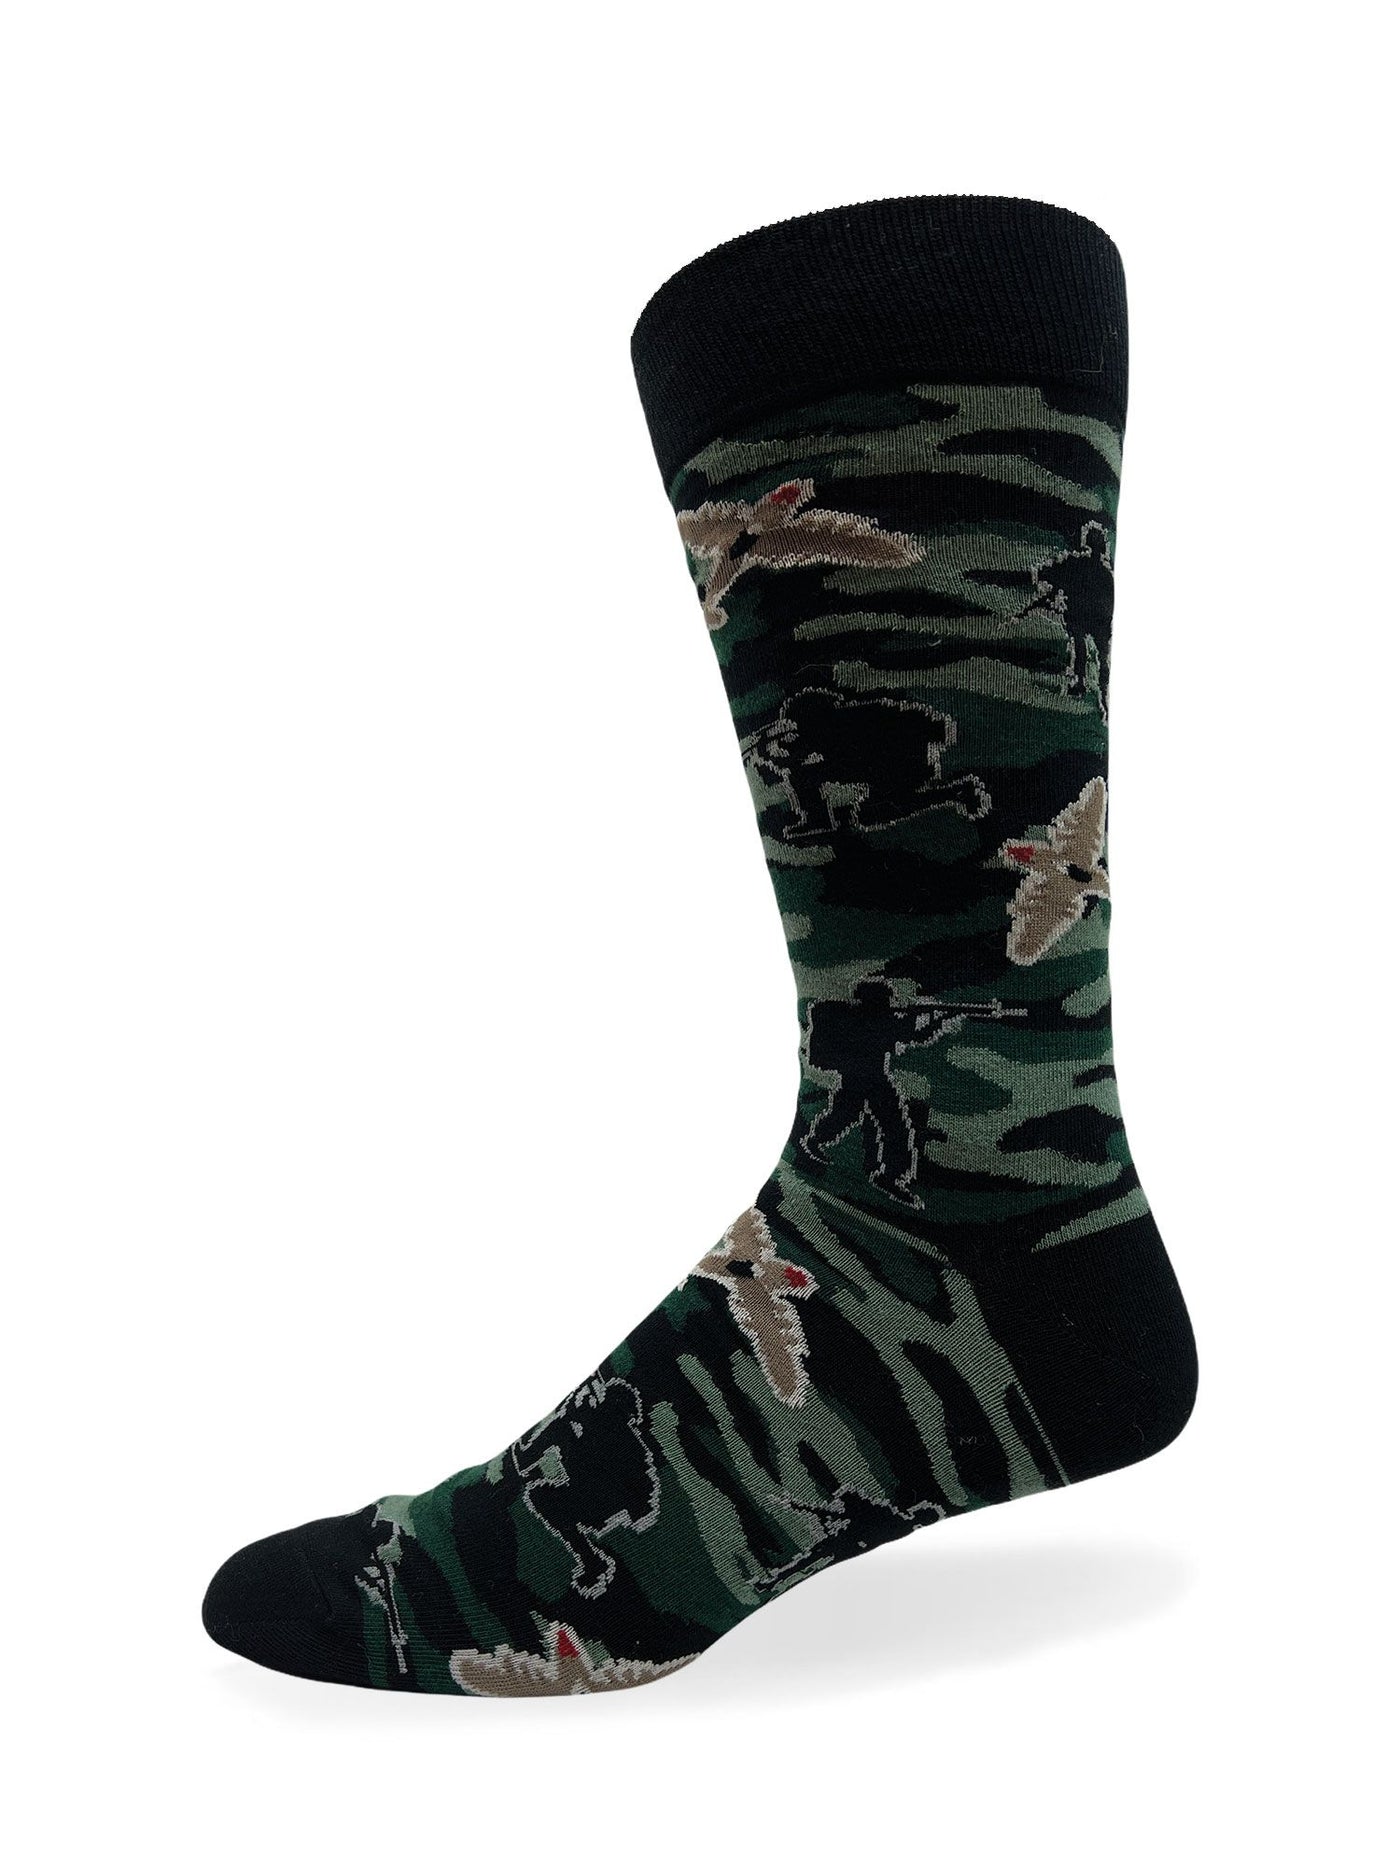 "Solider Army " Pattern Cotton Dress Sock by Crazy Toes -Large